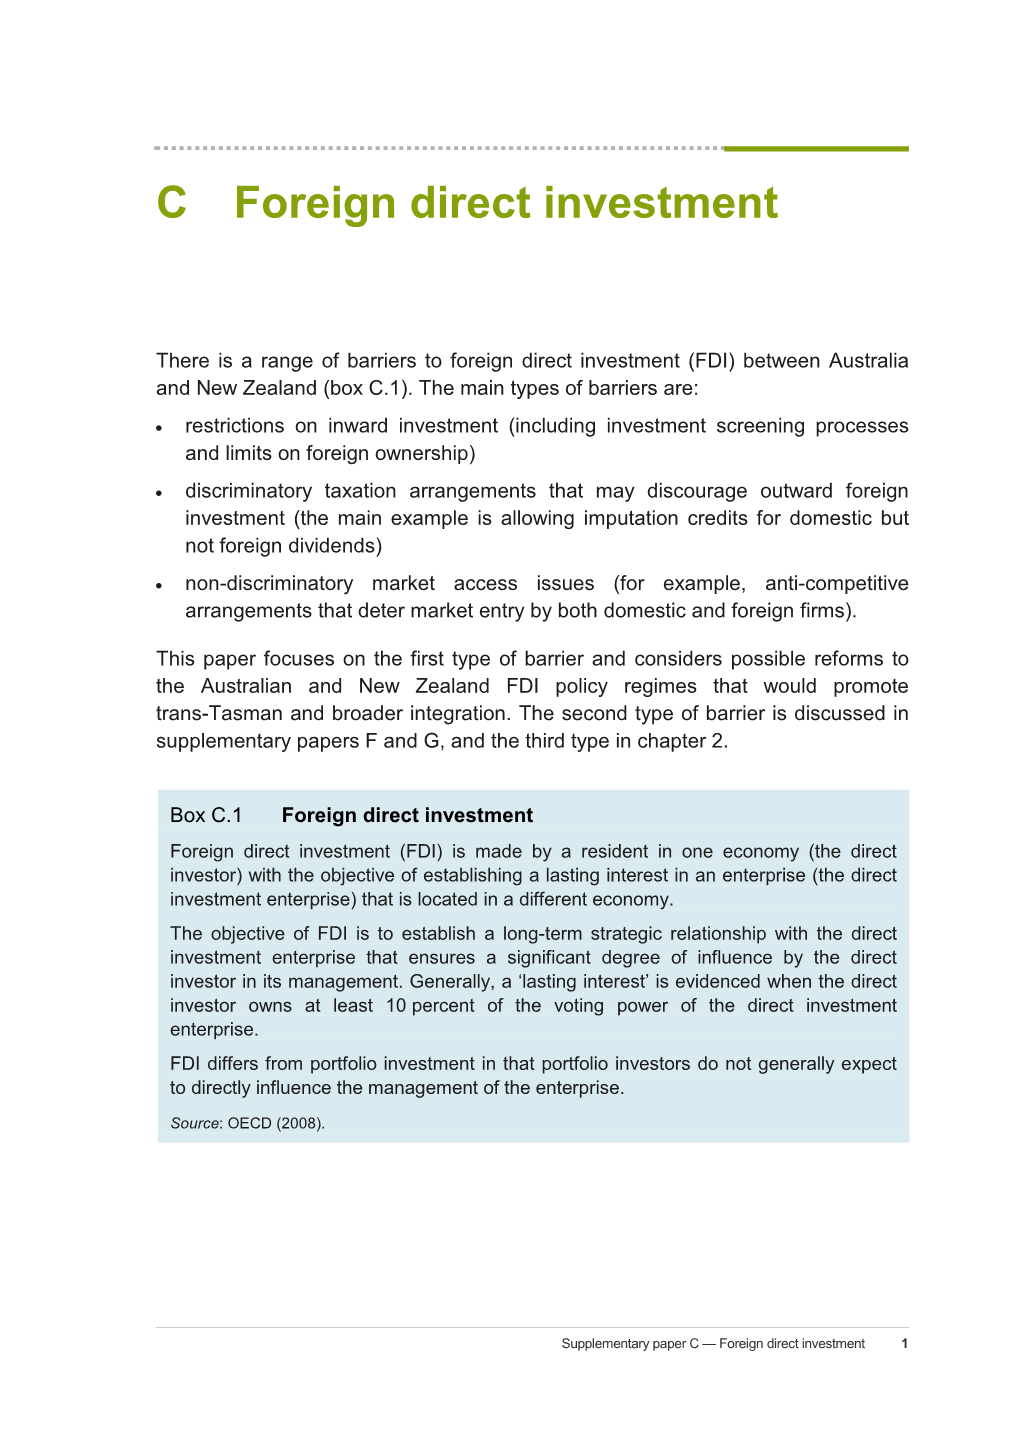 Supplementary Paper C Foreign Direct Investment